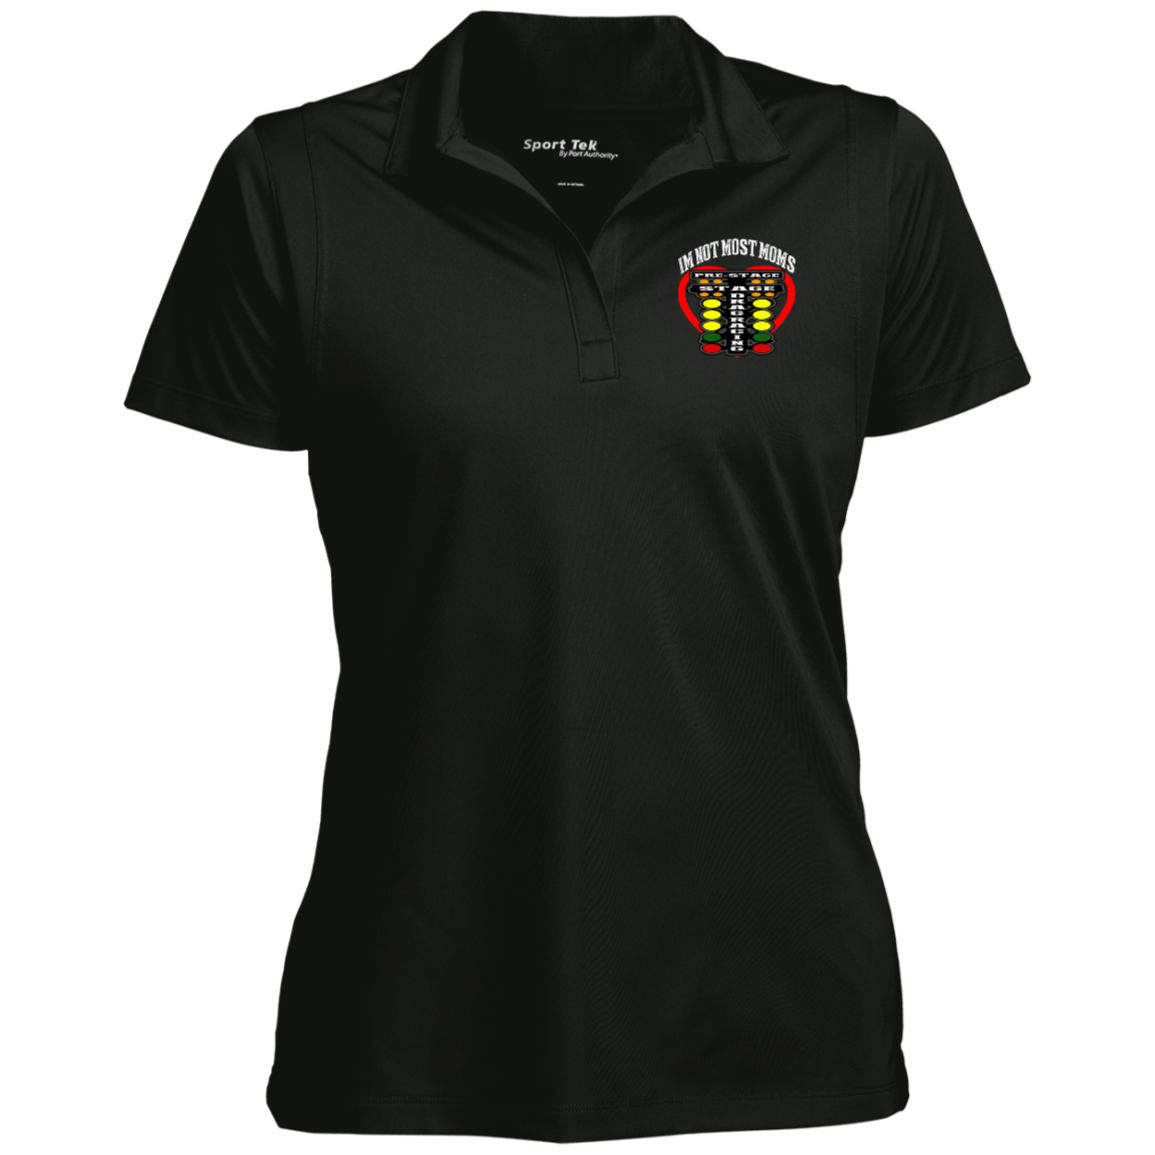 I'm Not Most Moms Drag Racing Ladies' Micropique Sport-Wick® Polo